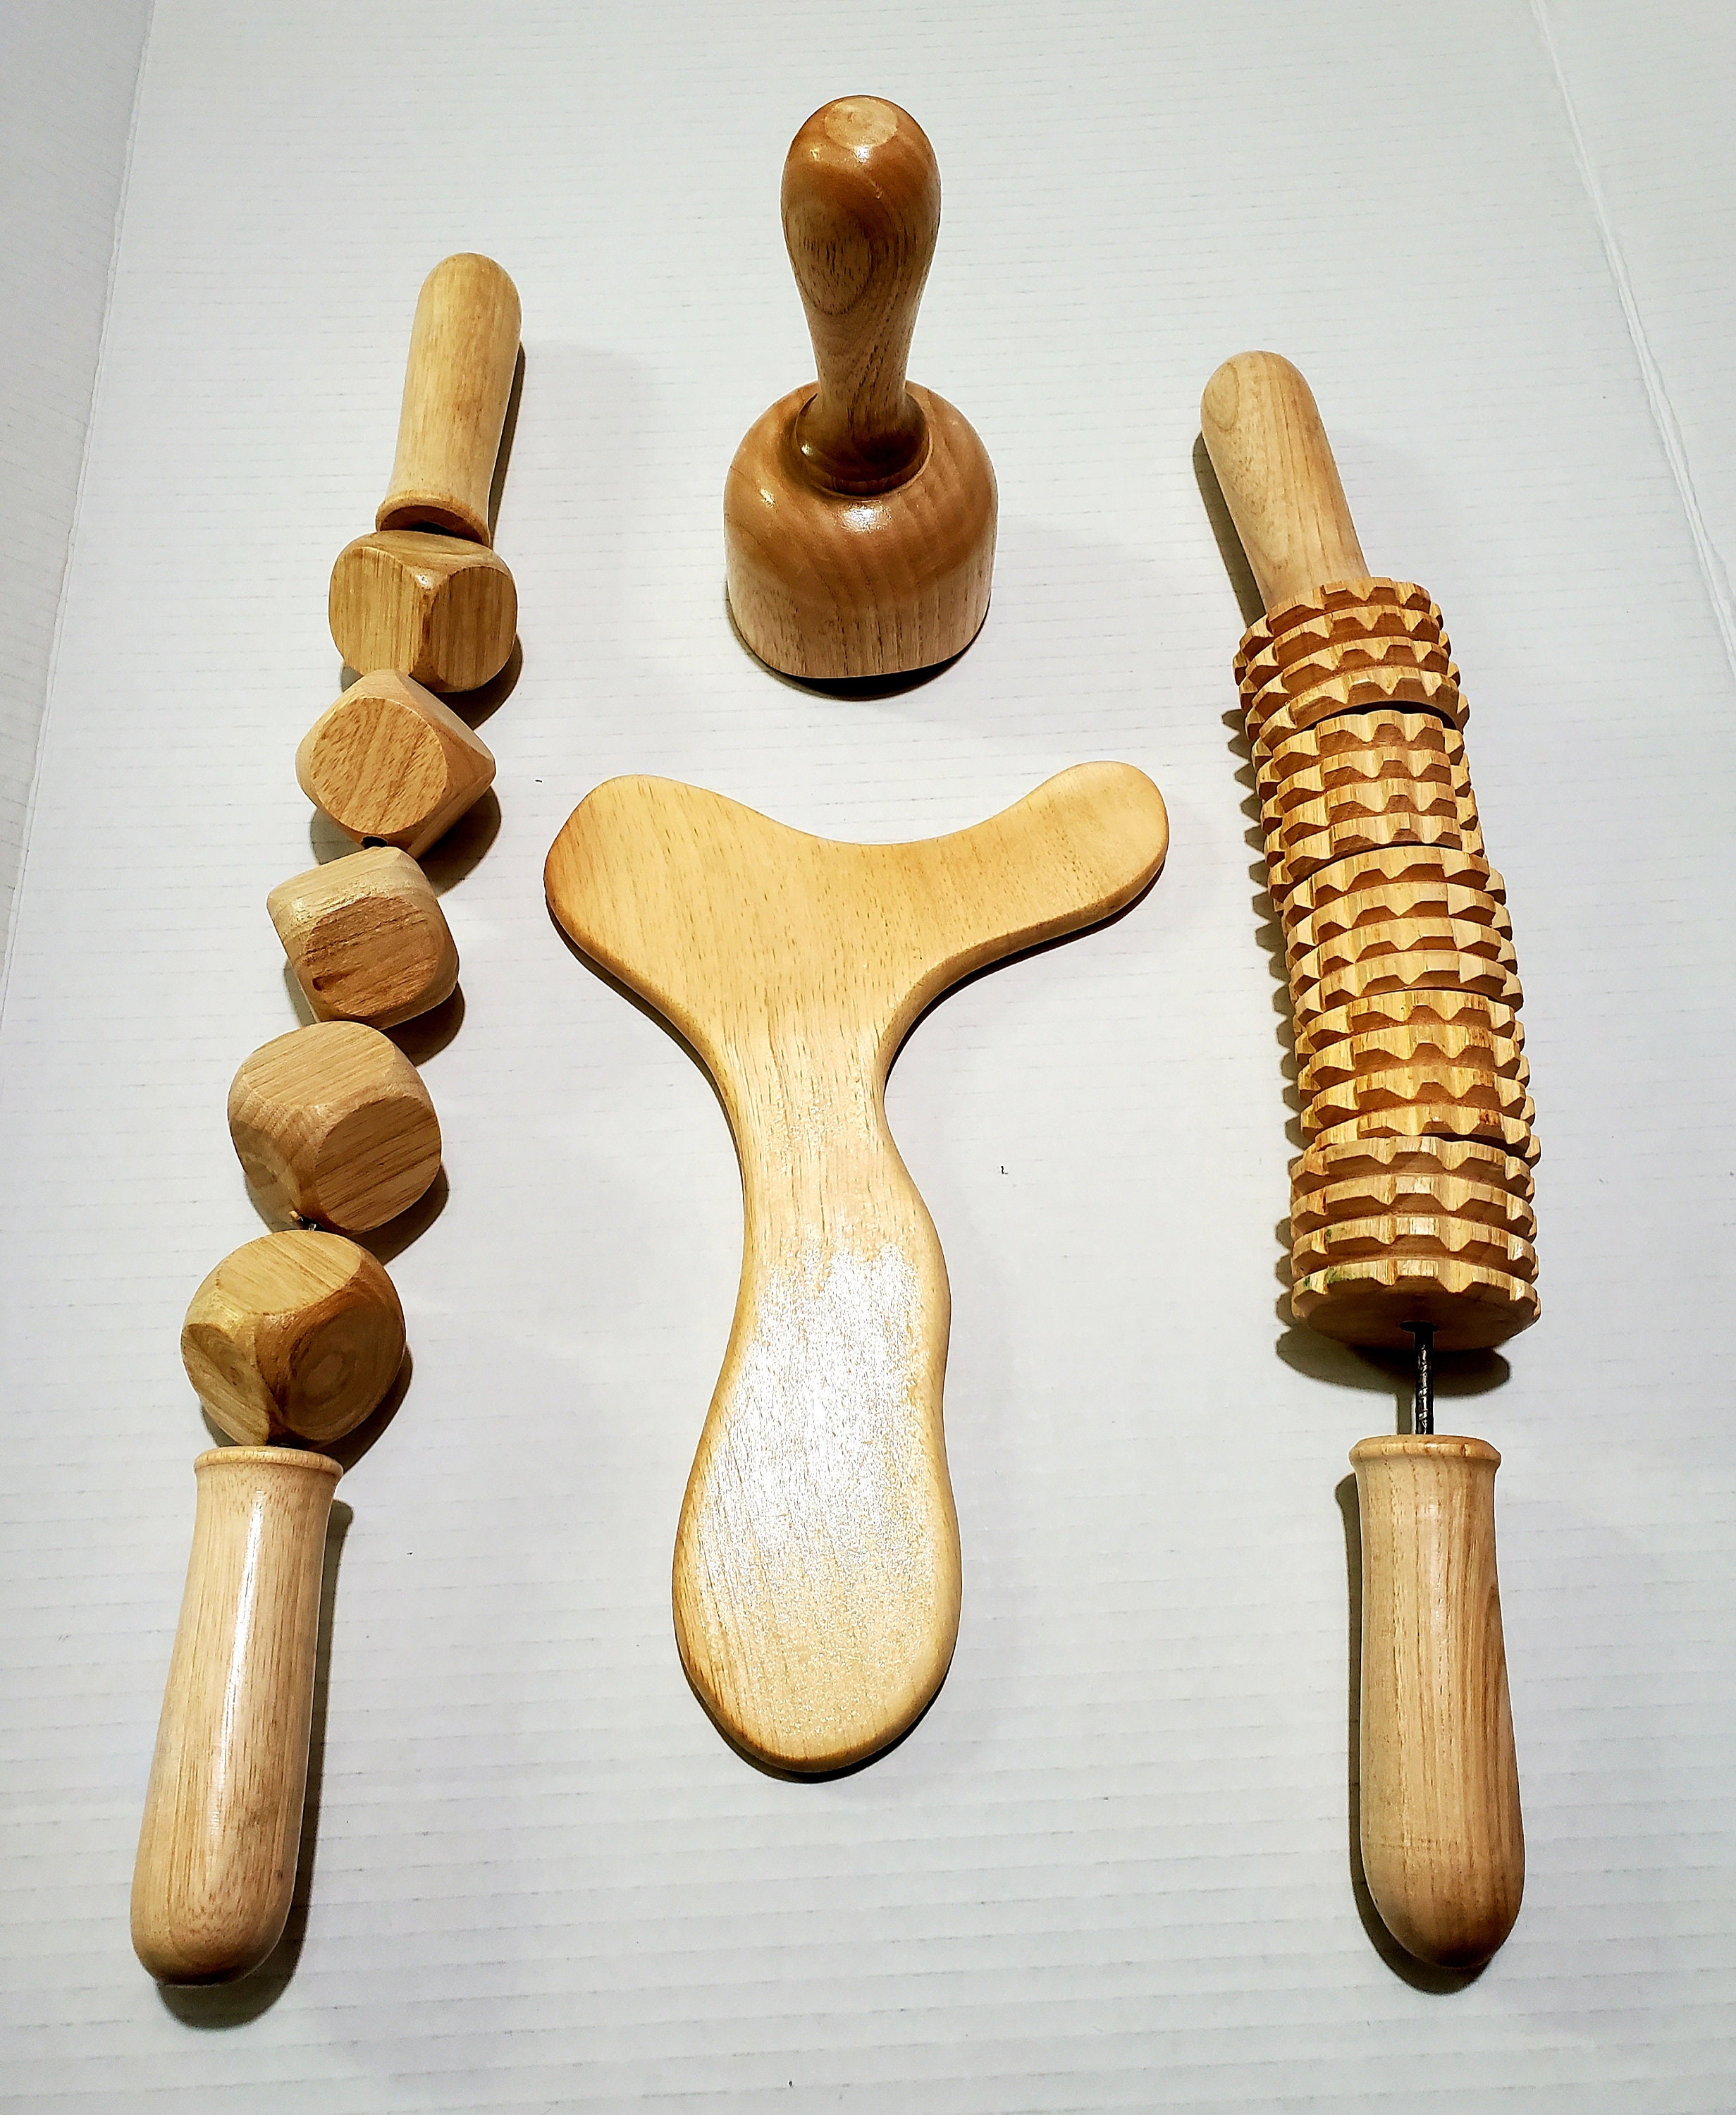 Wooden Massage Kit for Tactile and Proprioceptive Input - 8 pc